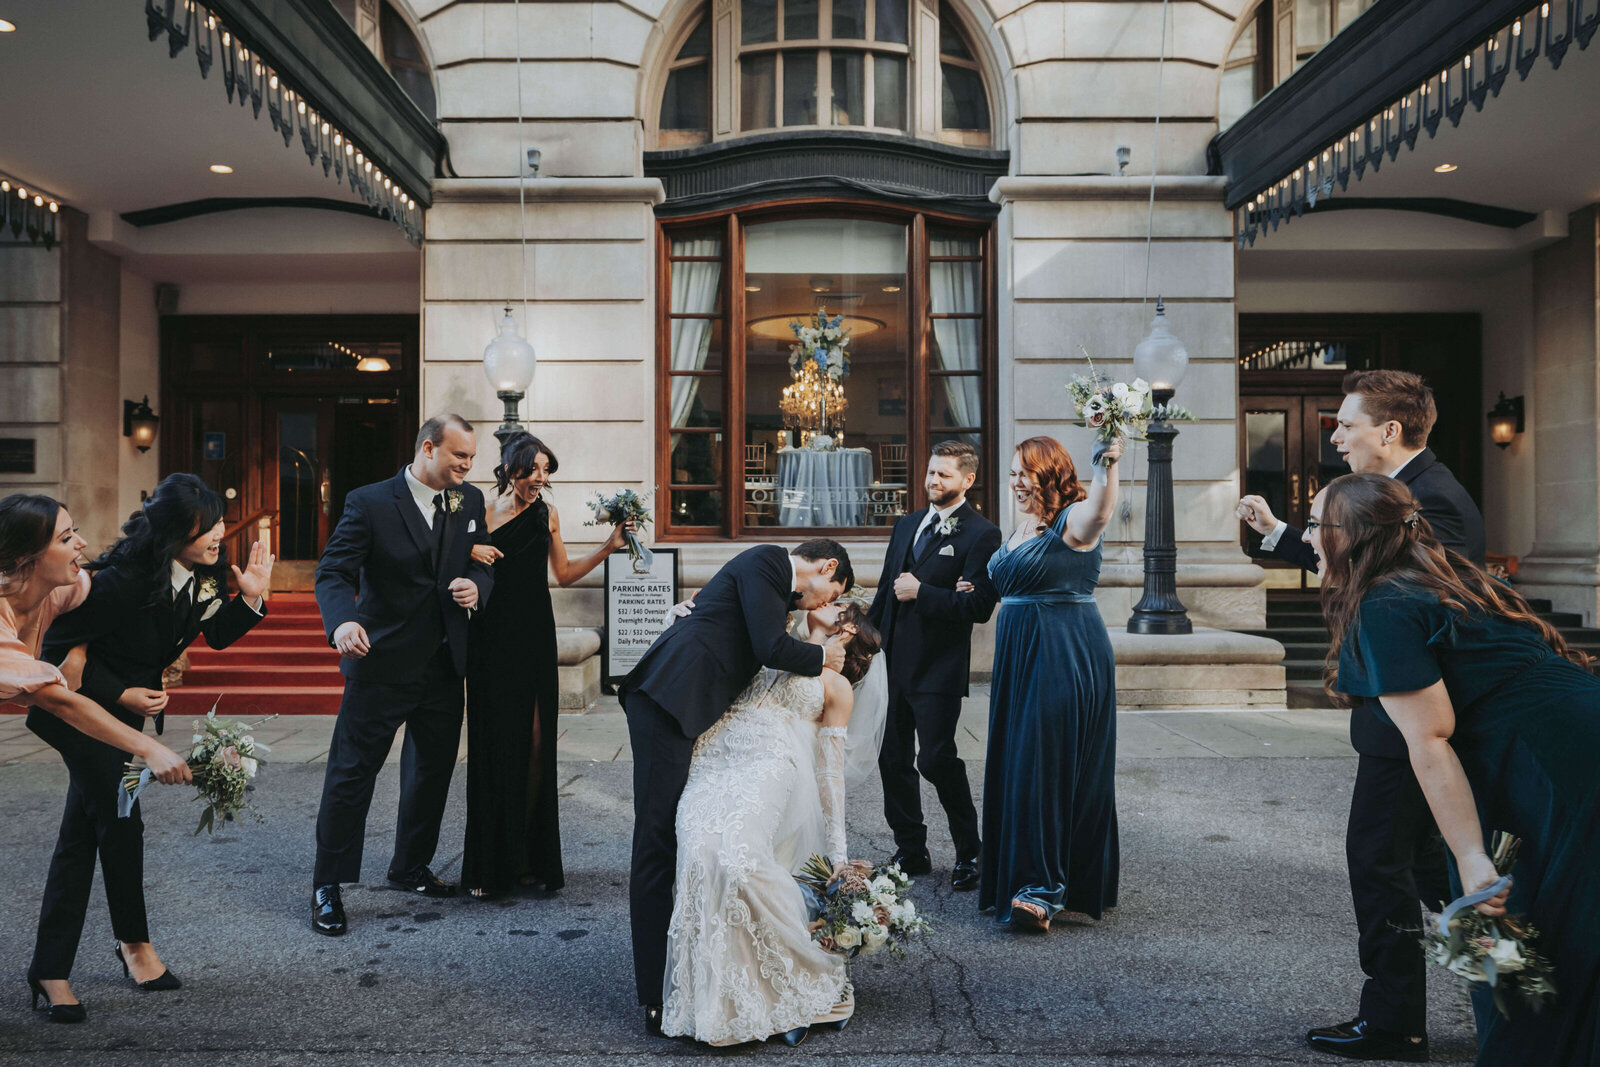 Bridal party photos in the Seelbach Hotel, Louisville